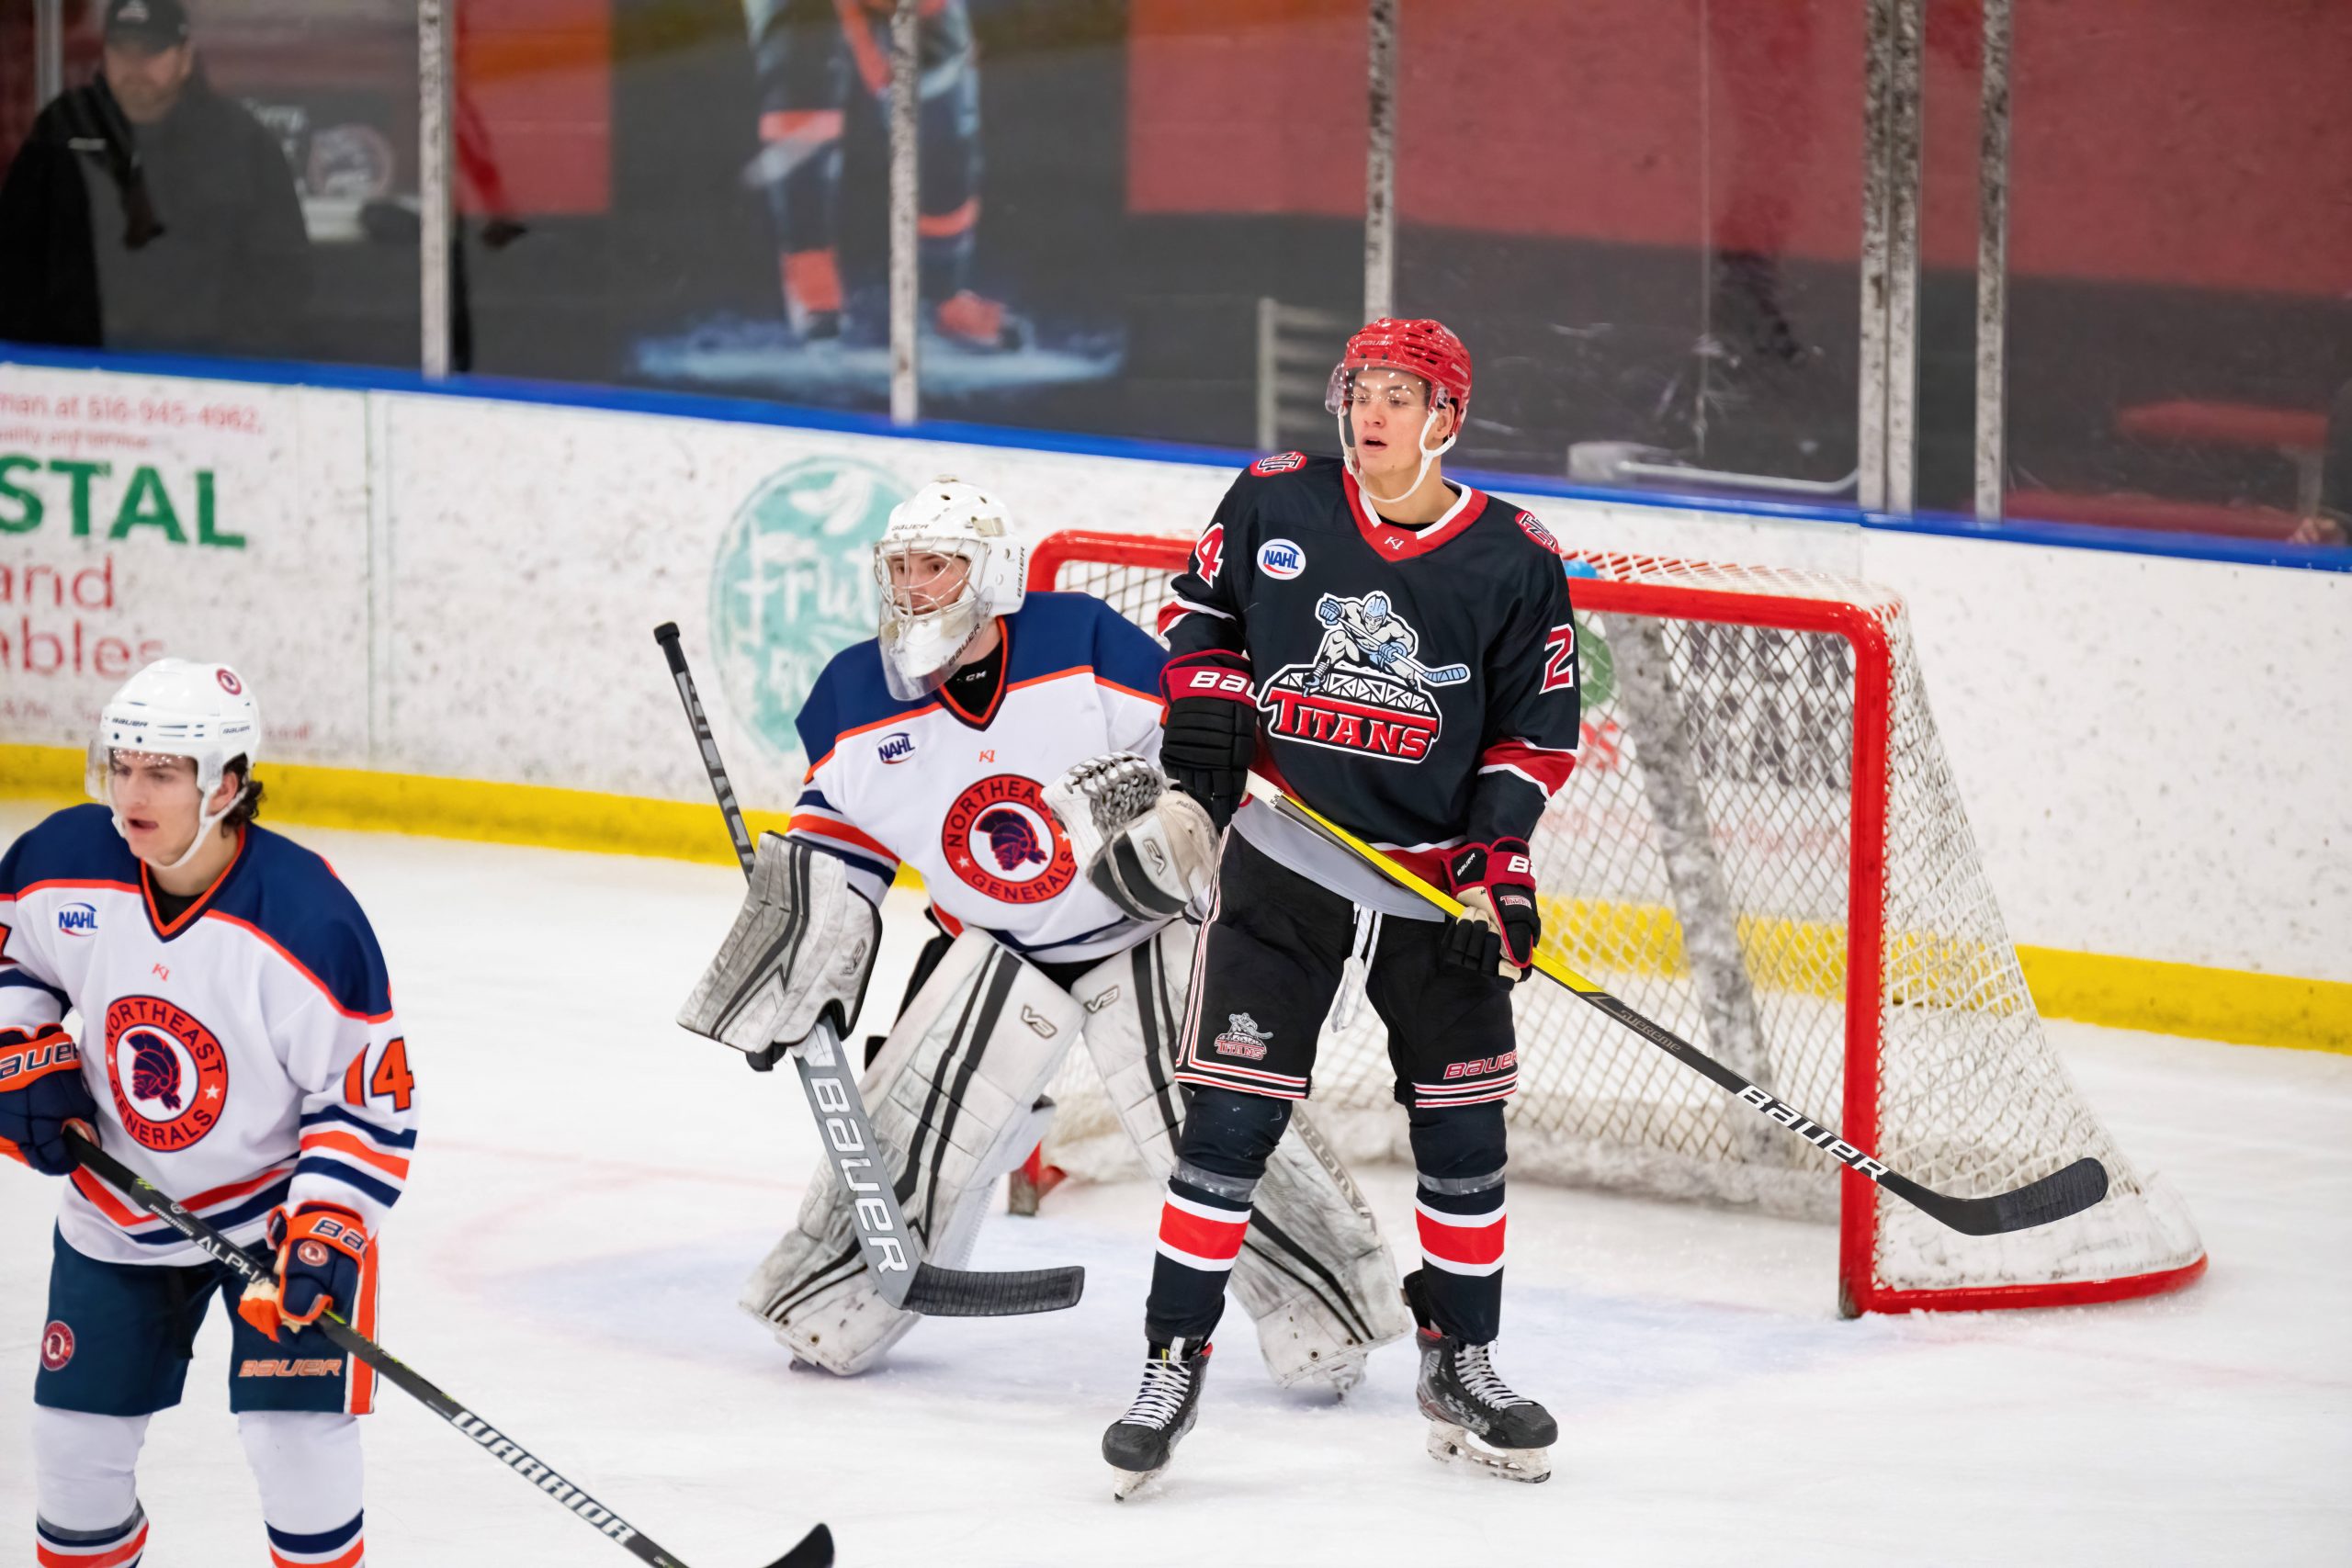 Titans fall 4 – 2 as Generals force fifth and deciding game